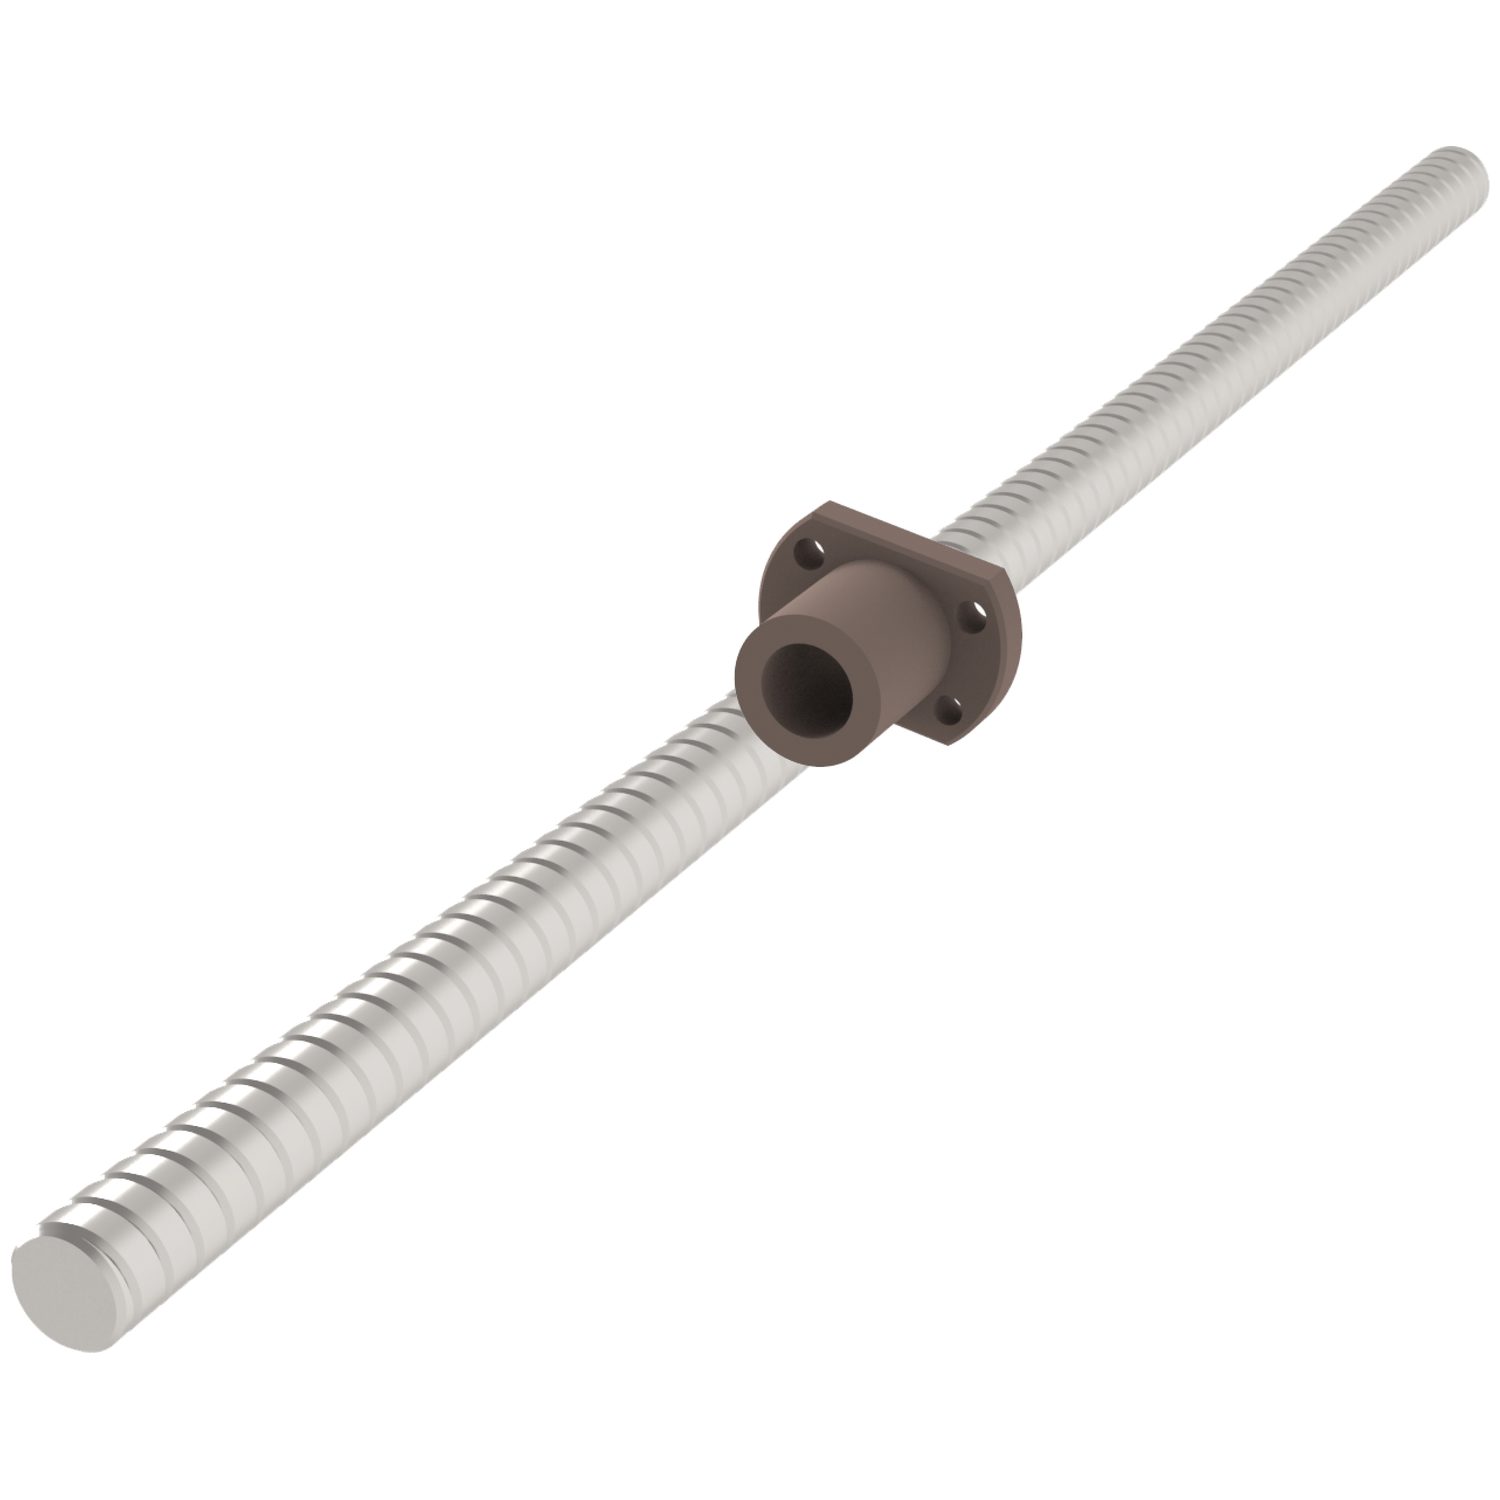 Flanged High Helix Lead Screw Nuts Resin nut (PPS), to suit lead screw L1349. High precision. Tight axial clearance.